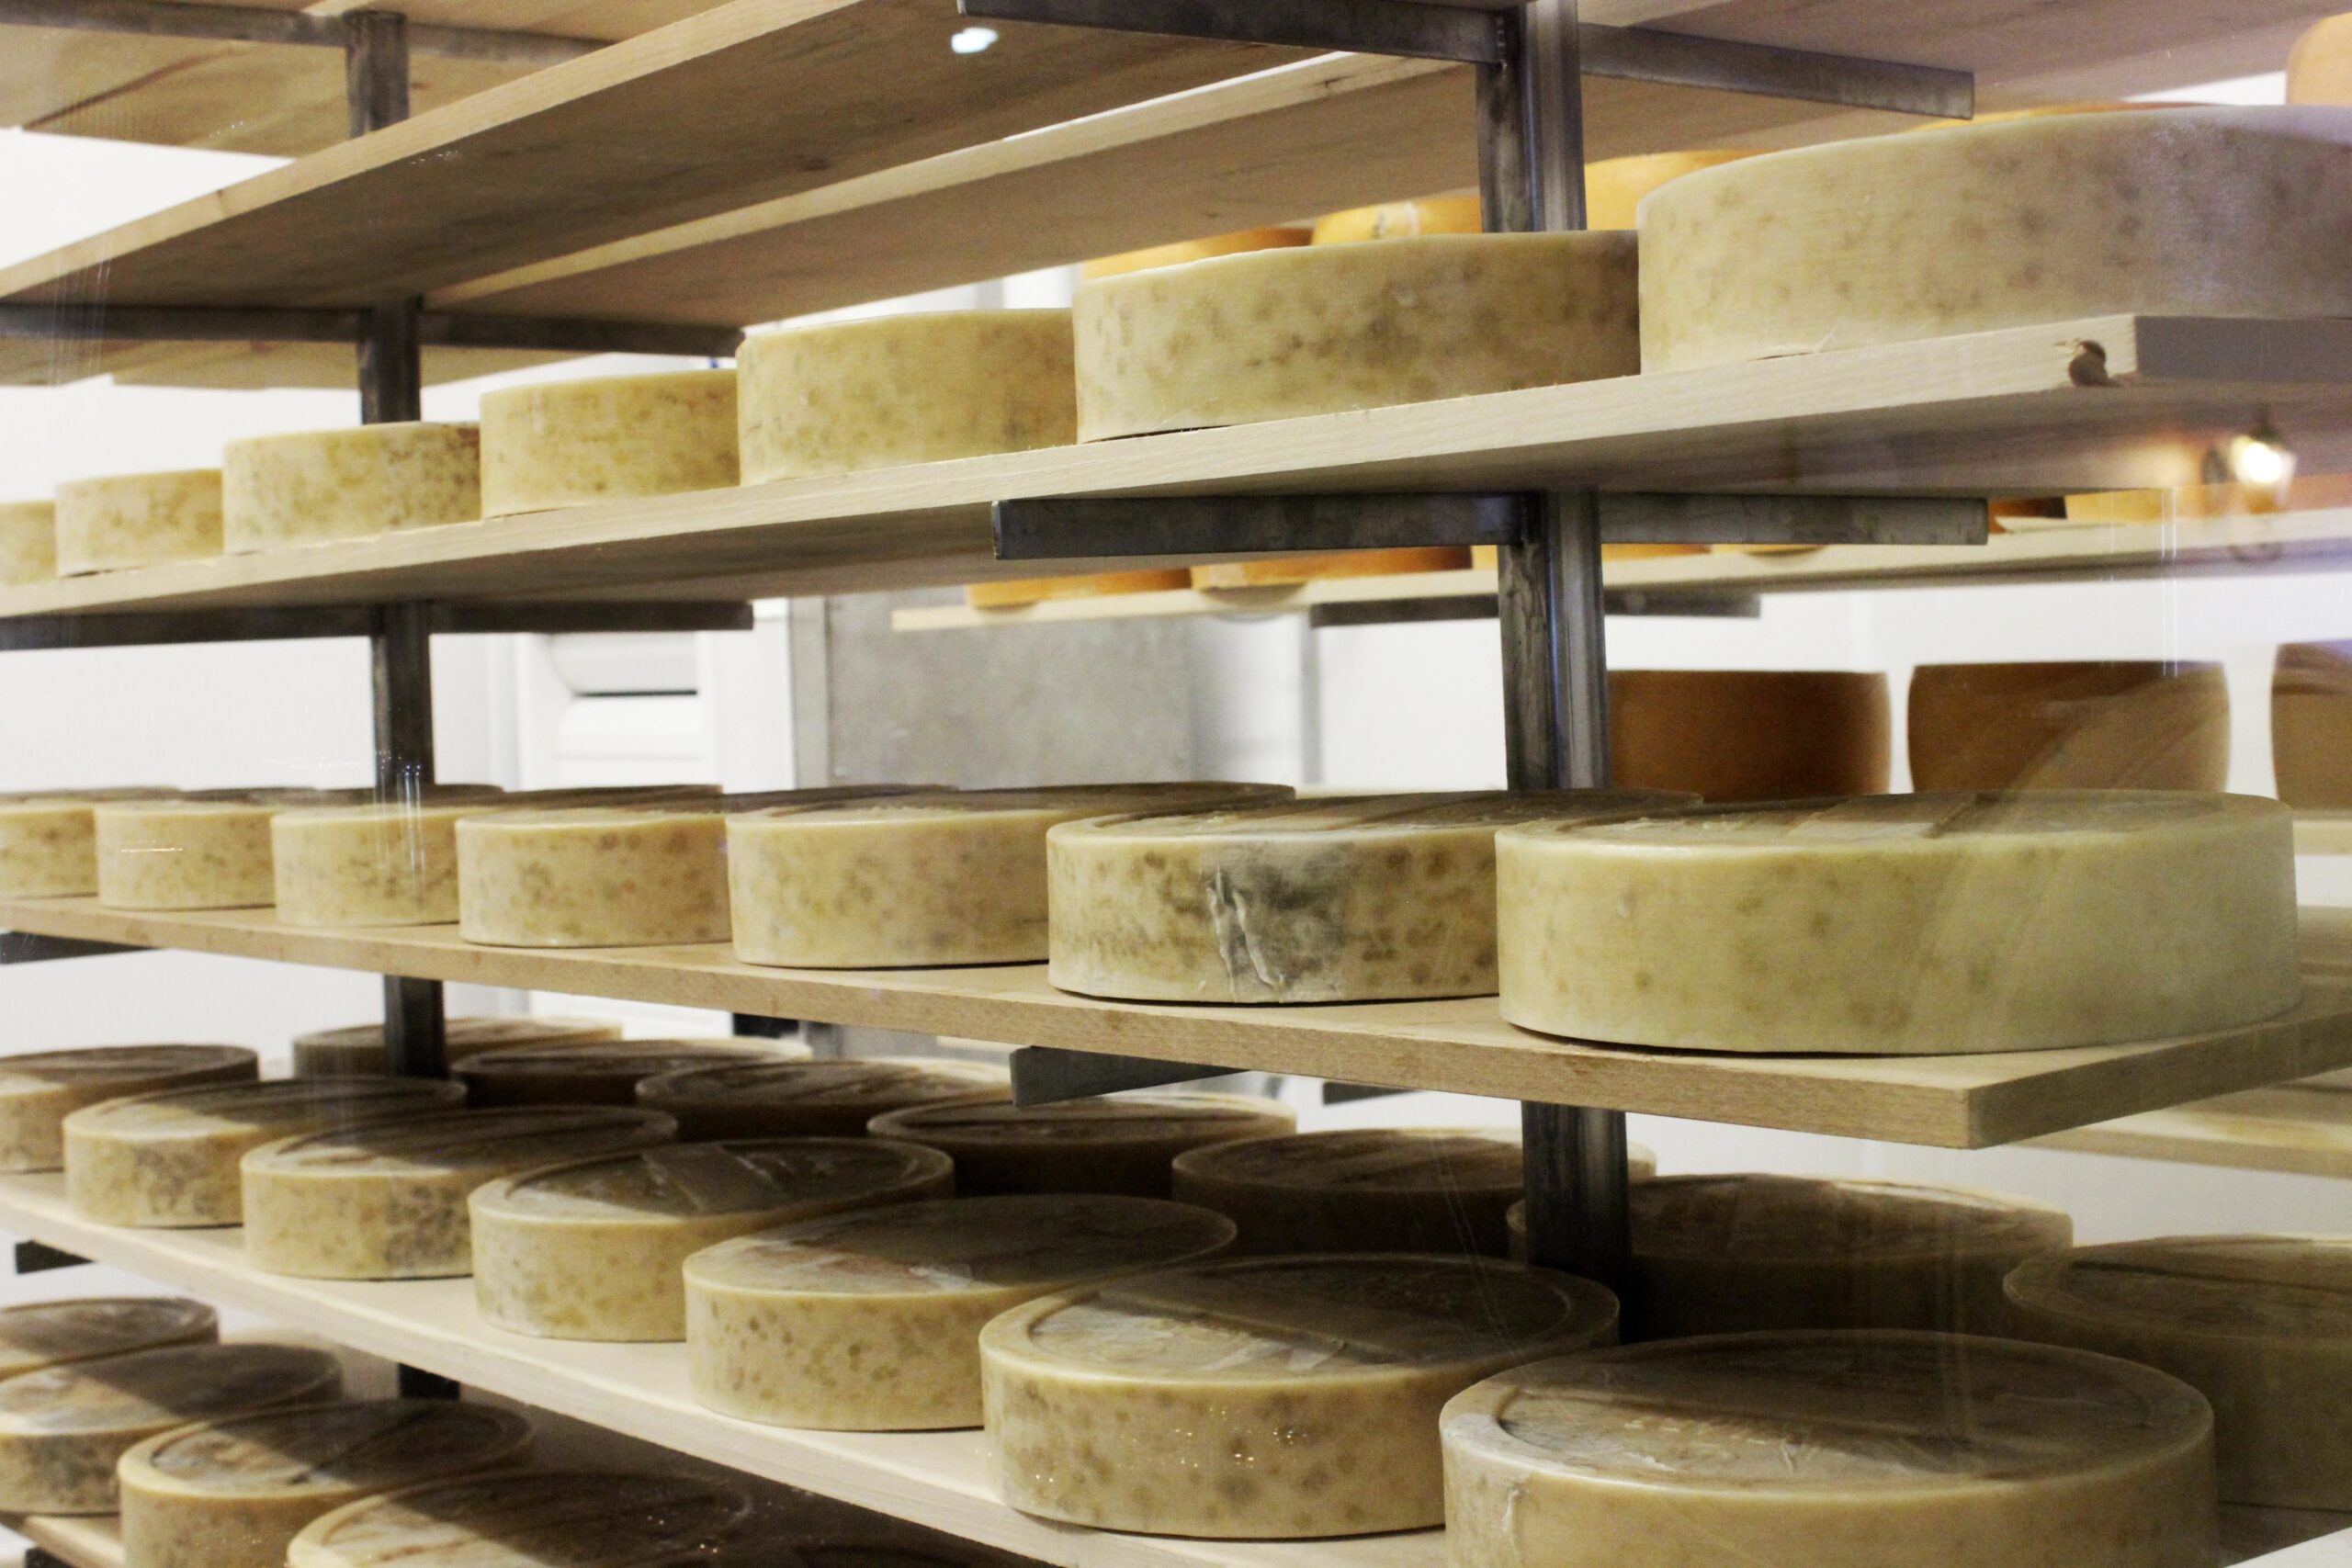 Wisconsin’s Specialty Cheesemakers May Be Better Off Than Other States